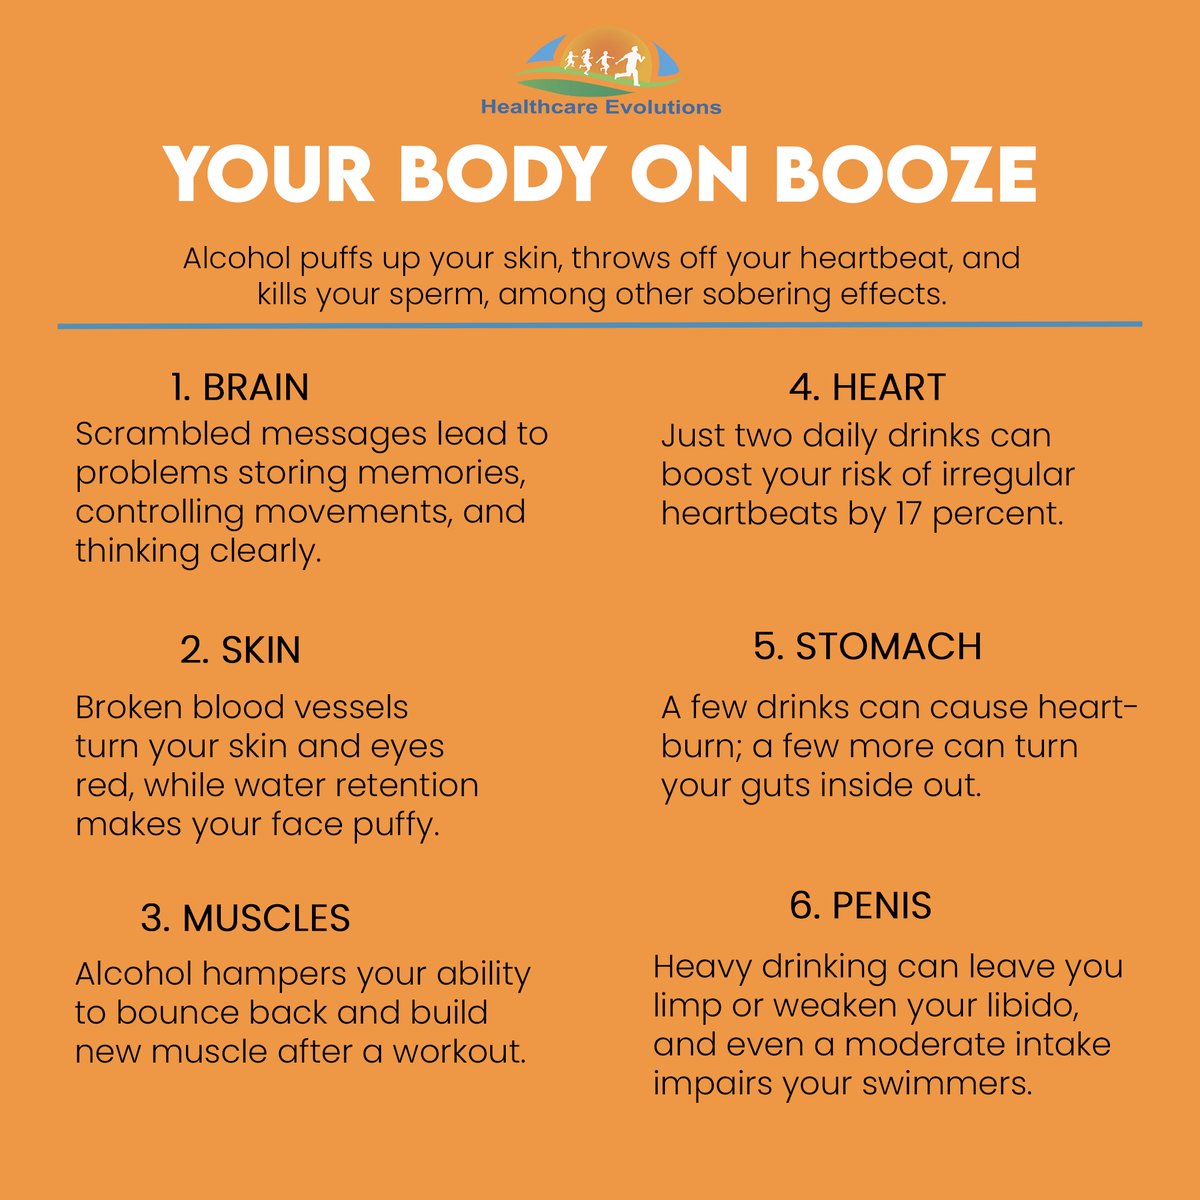 Why You Should Never Drink Alcohol?
Get To Know

#alcohol #alcoholawareness #health #generalawareness #healthylifestyle #stopdrinking #healthandsafety